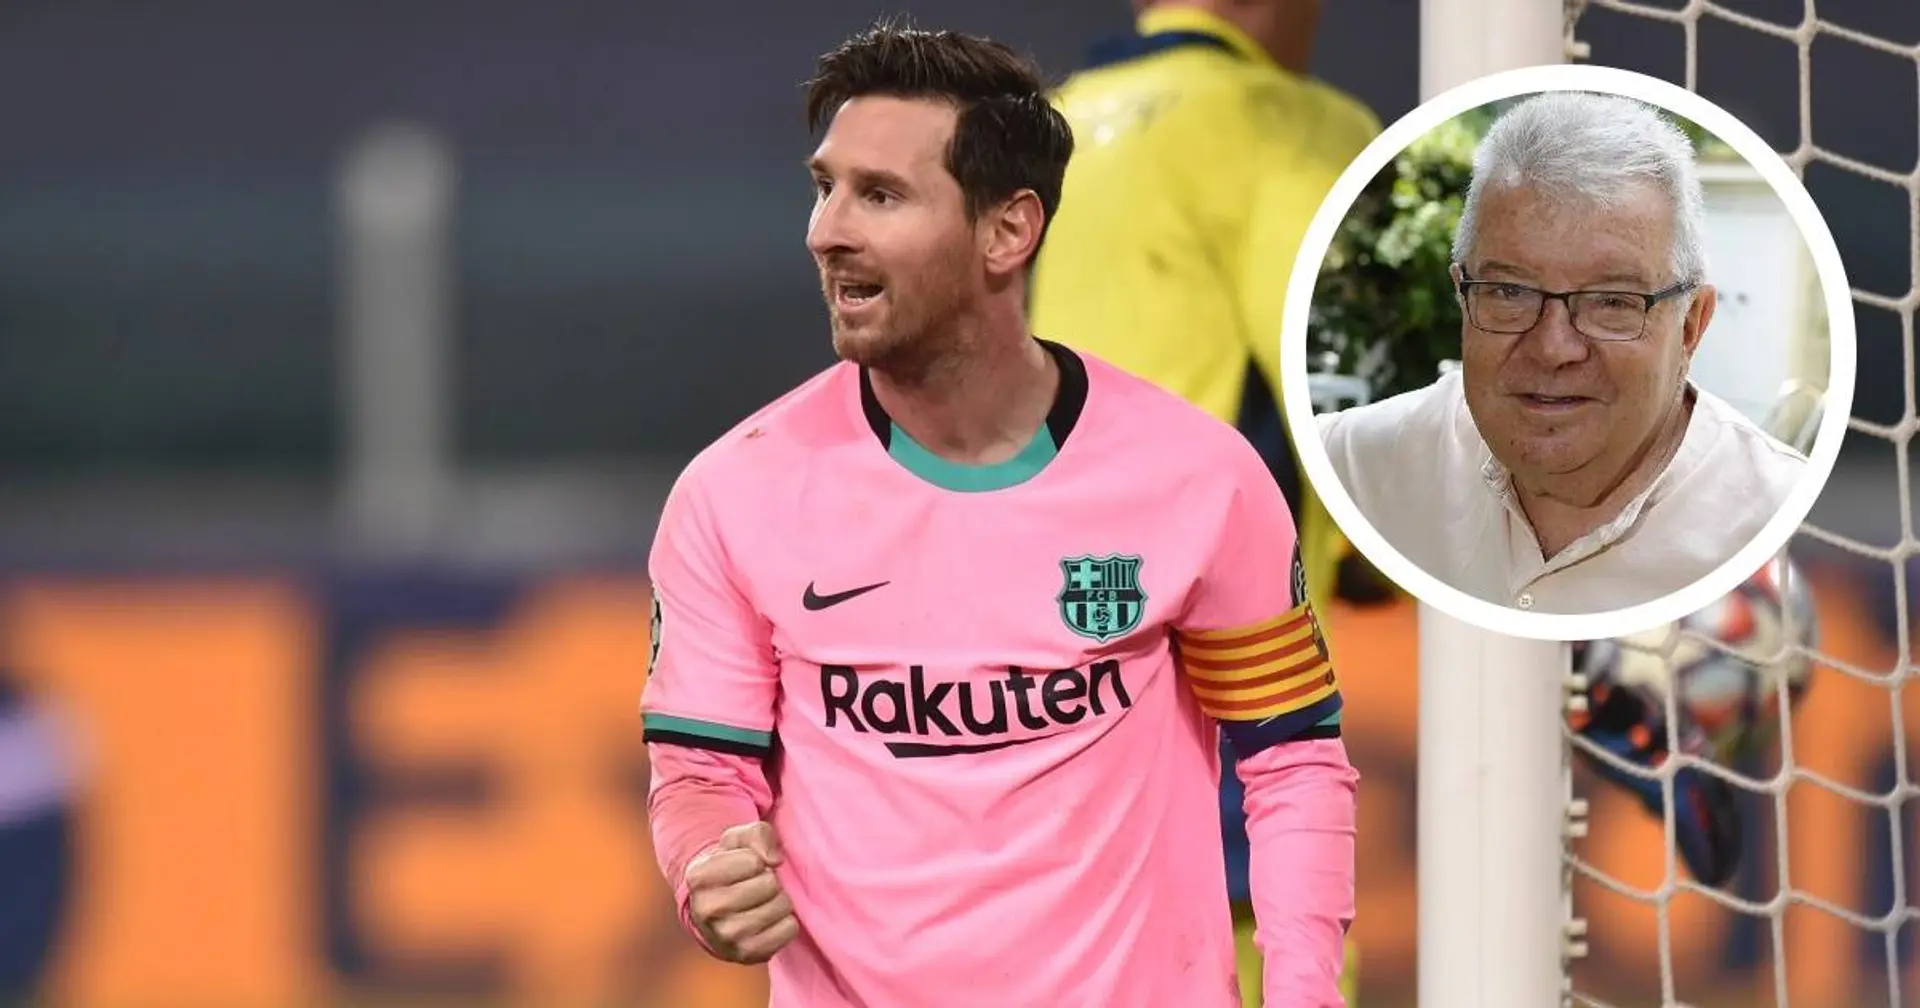 Minguella, agent who discovered Messi, names crucial reason why Man City wouldn't be best place for Leo